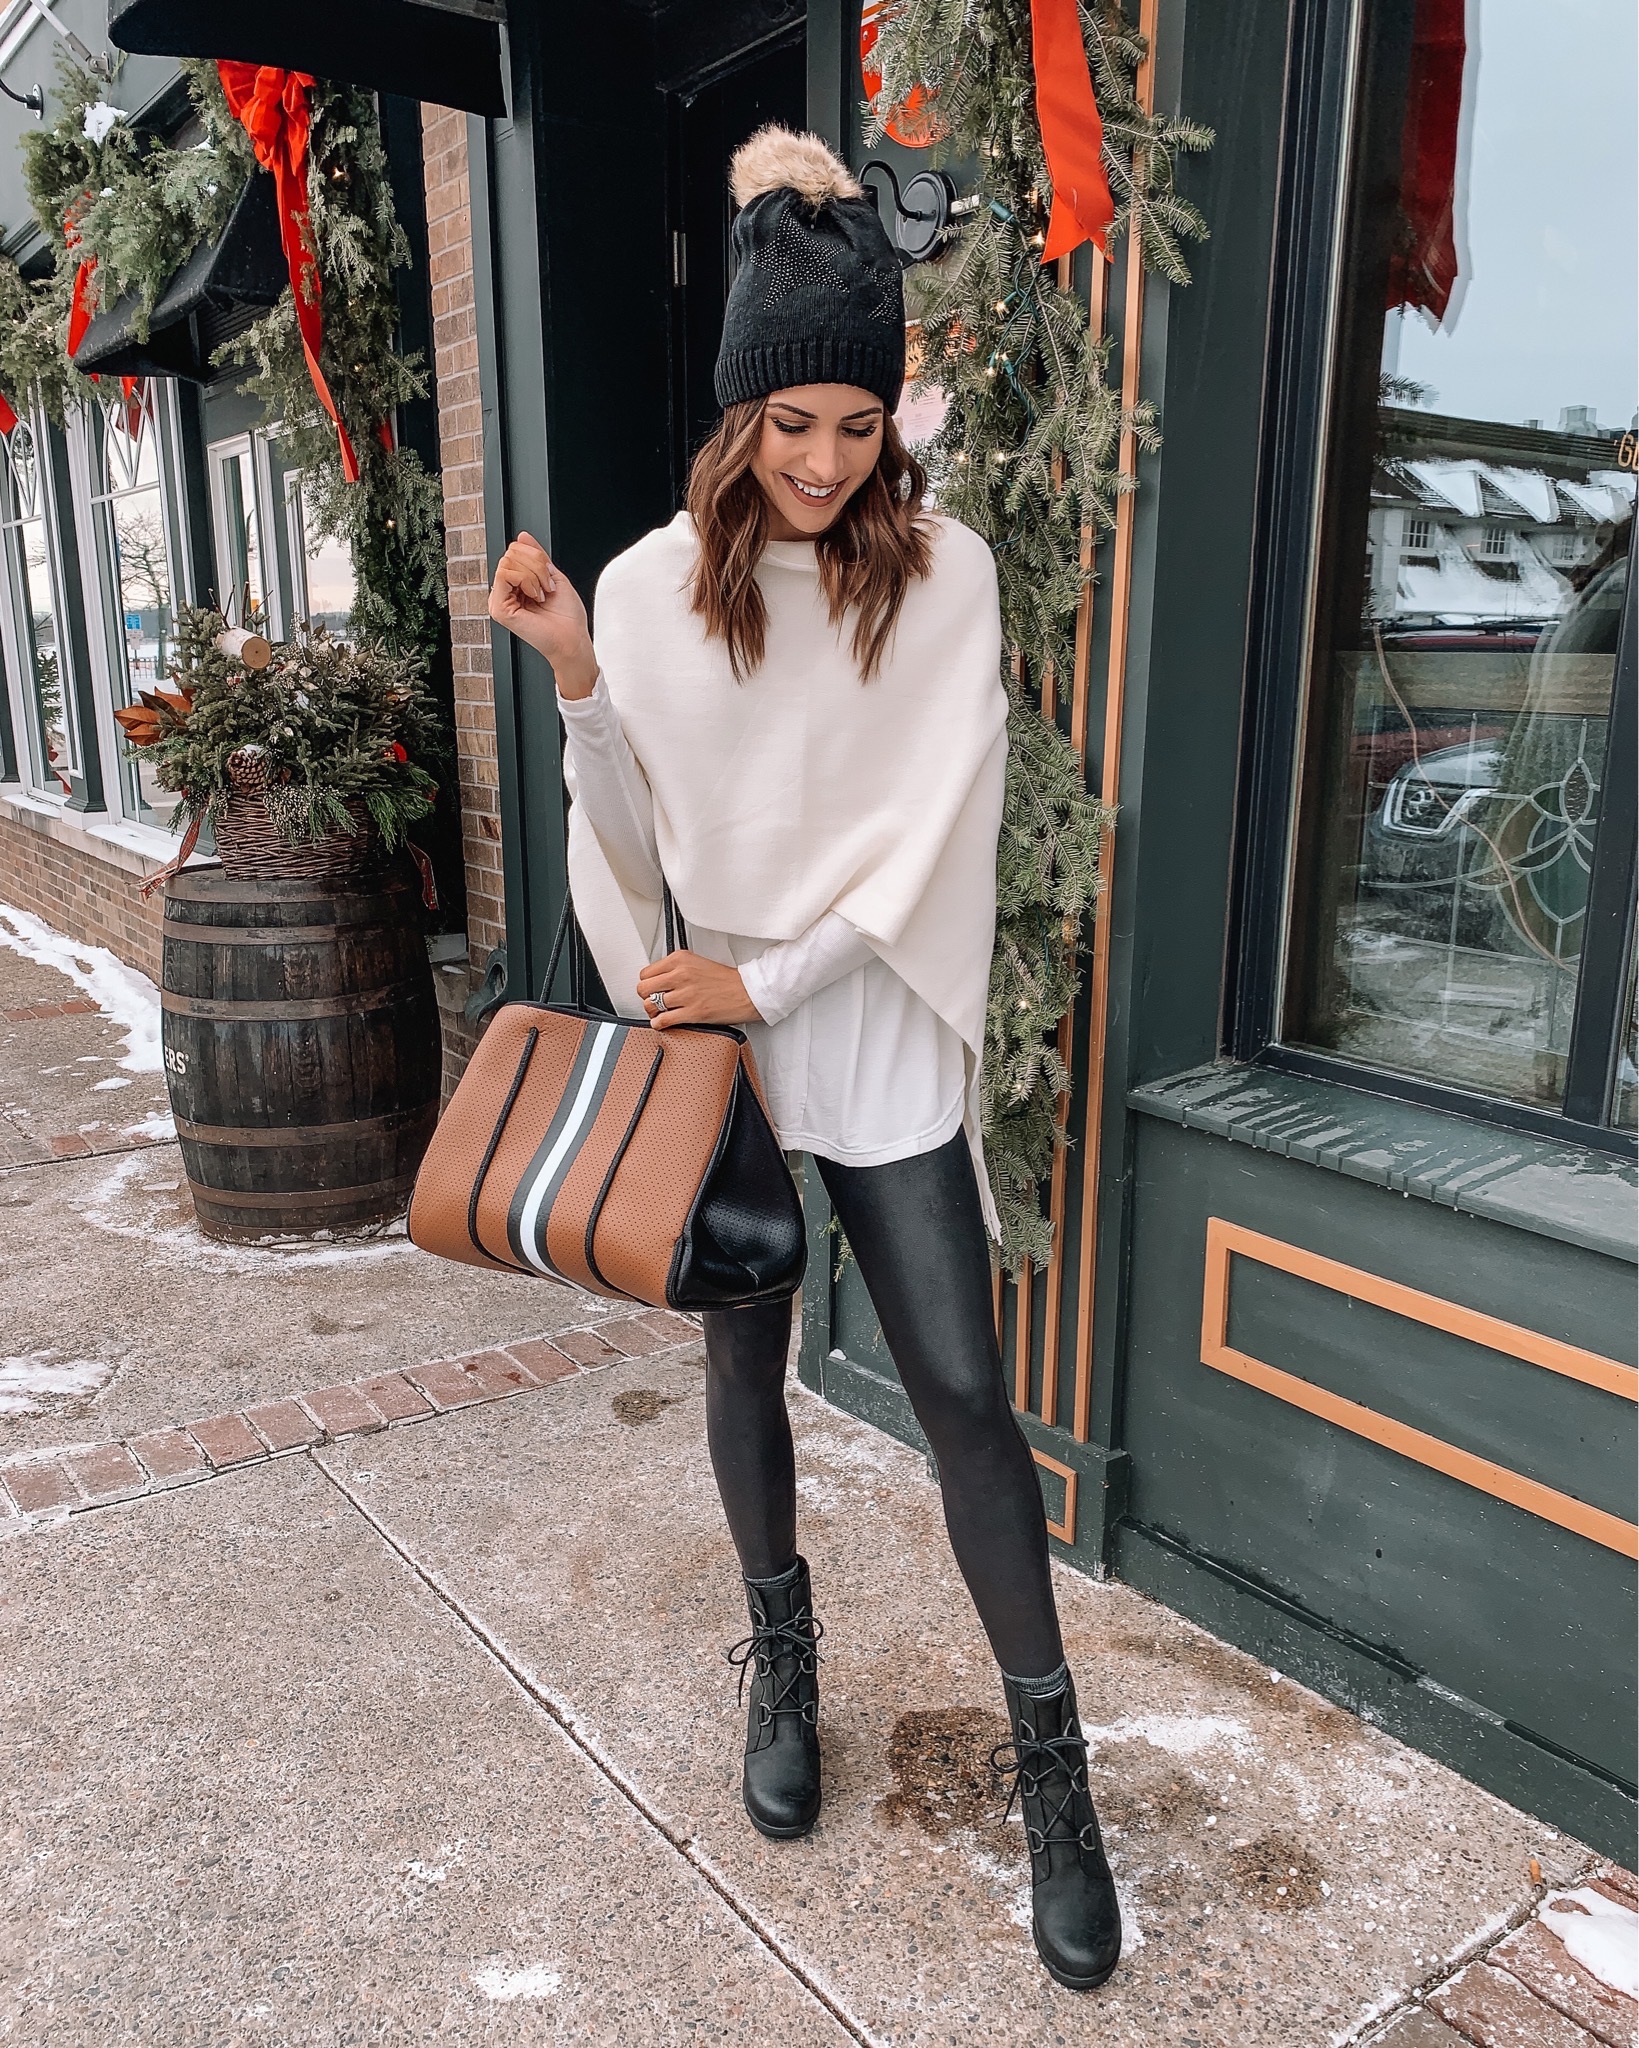 sorel-joan-of-arctic-black-boots-outfit-1 - The Styled Press